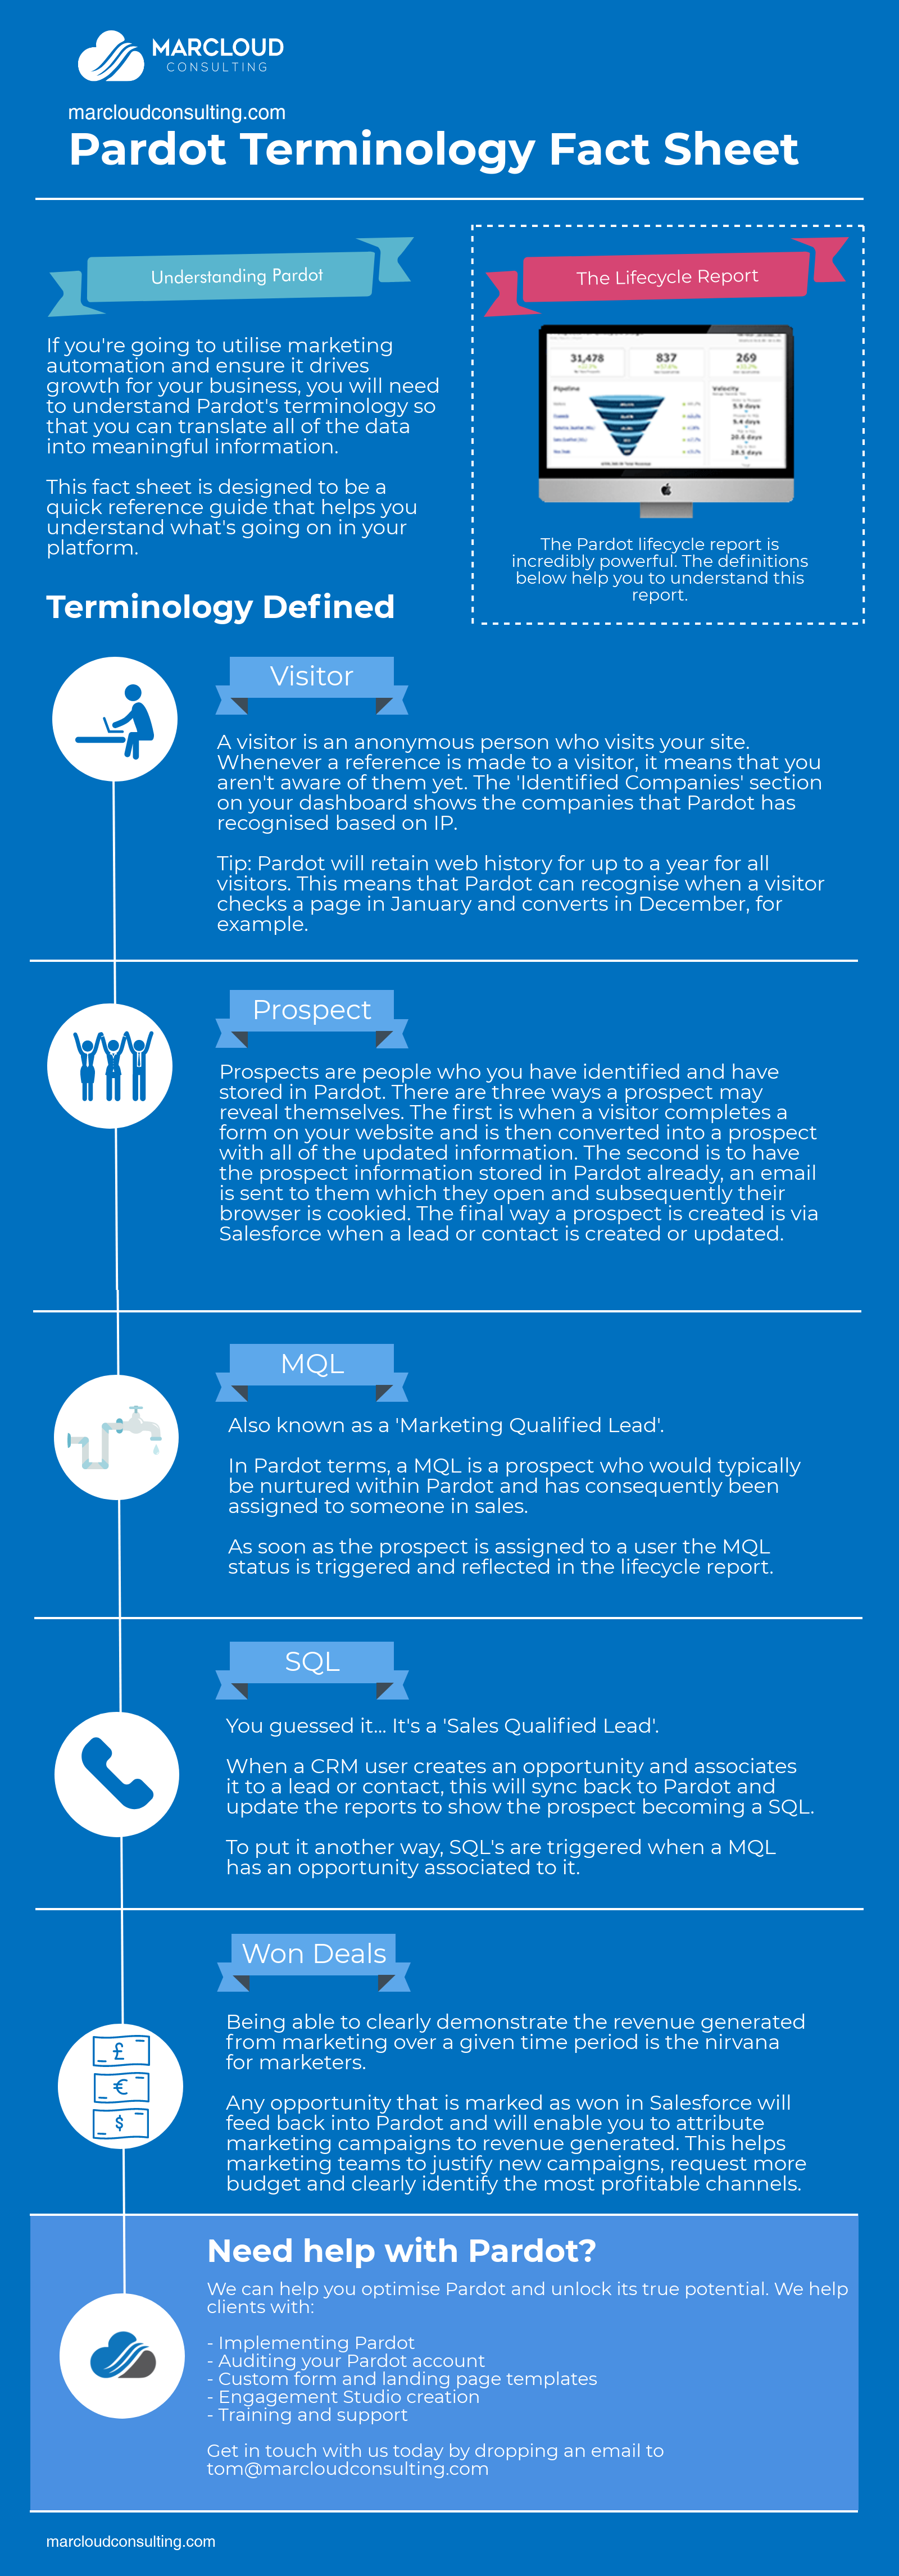 Pardot infographic lifecycle report